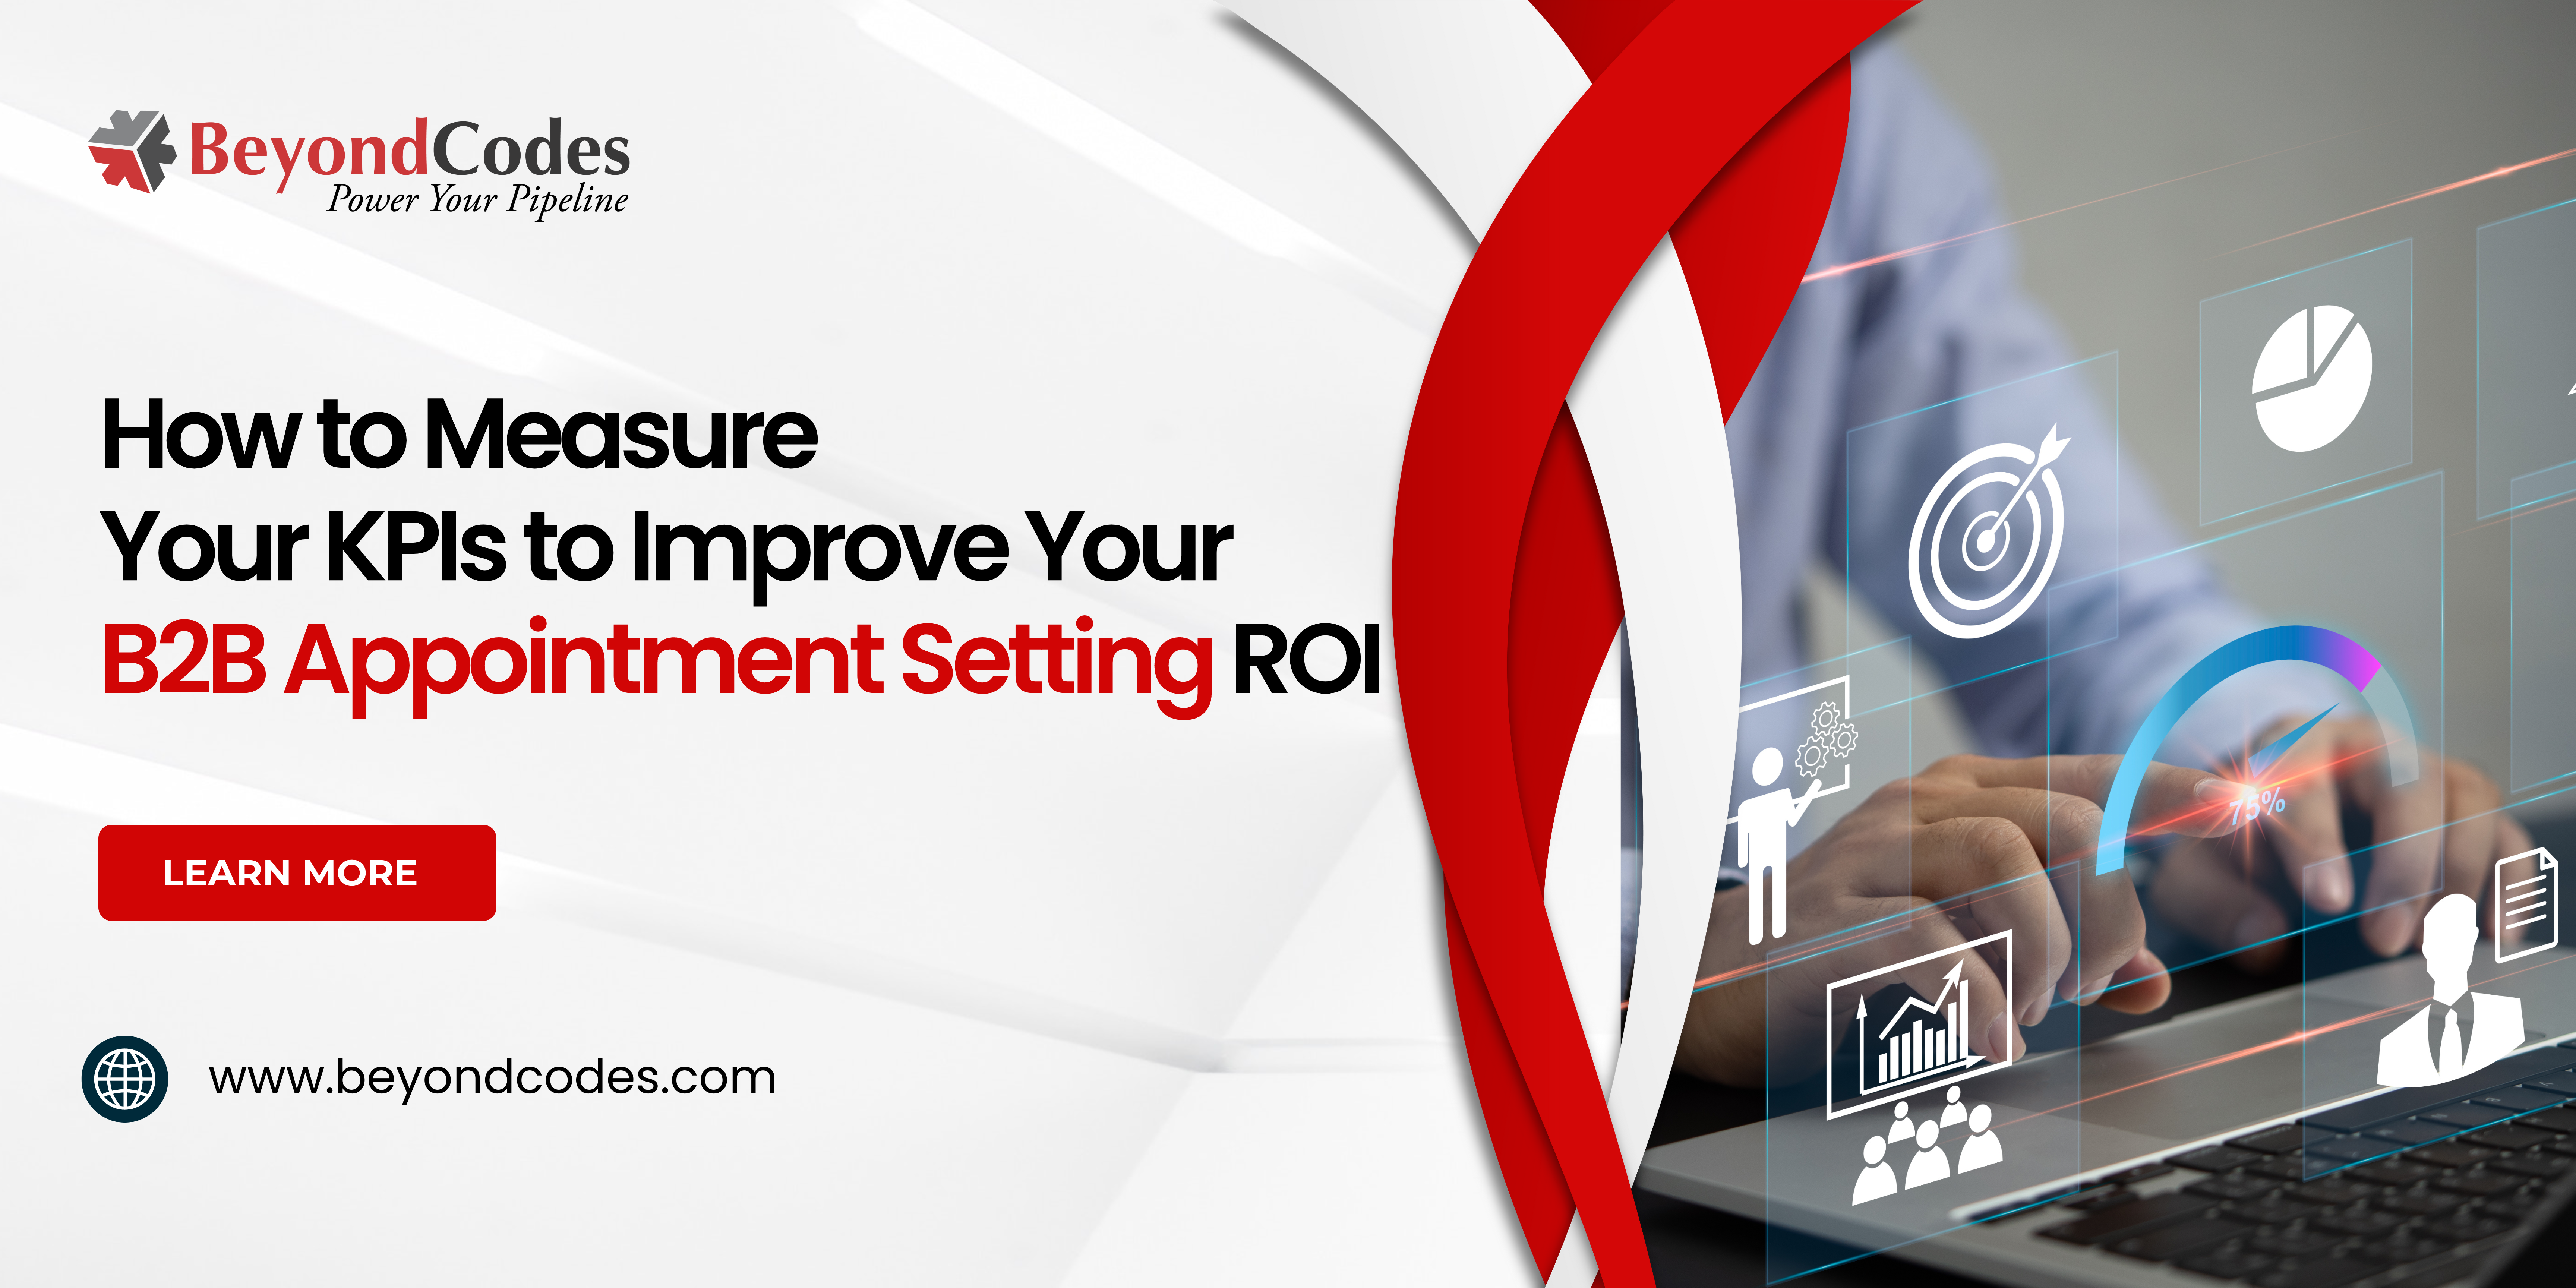 KPIs to Improve Your B2B Appointment Setting ROI - beyondcodes